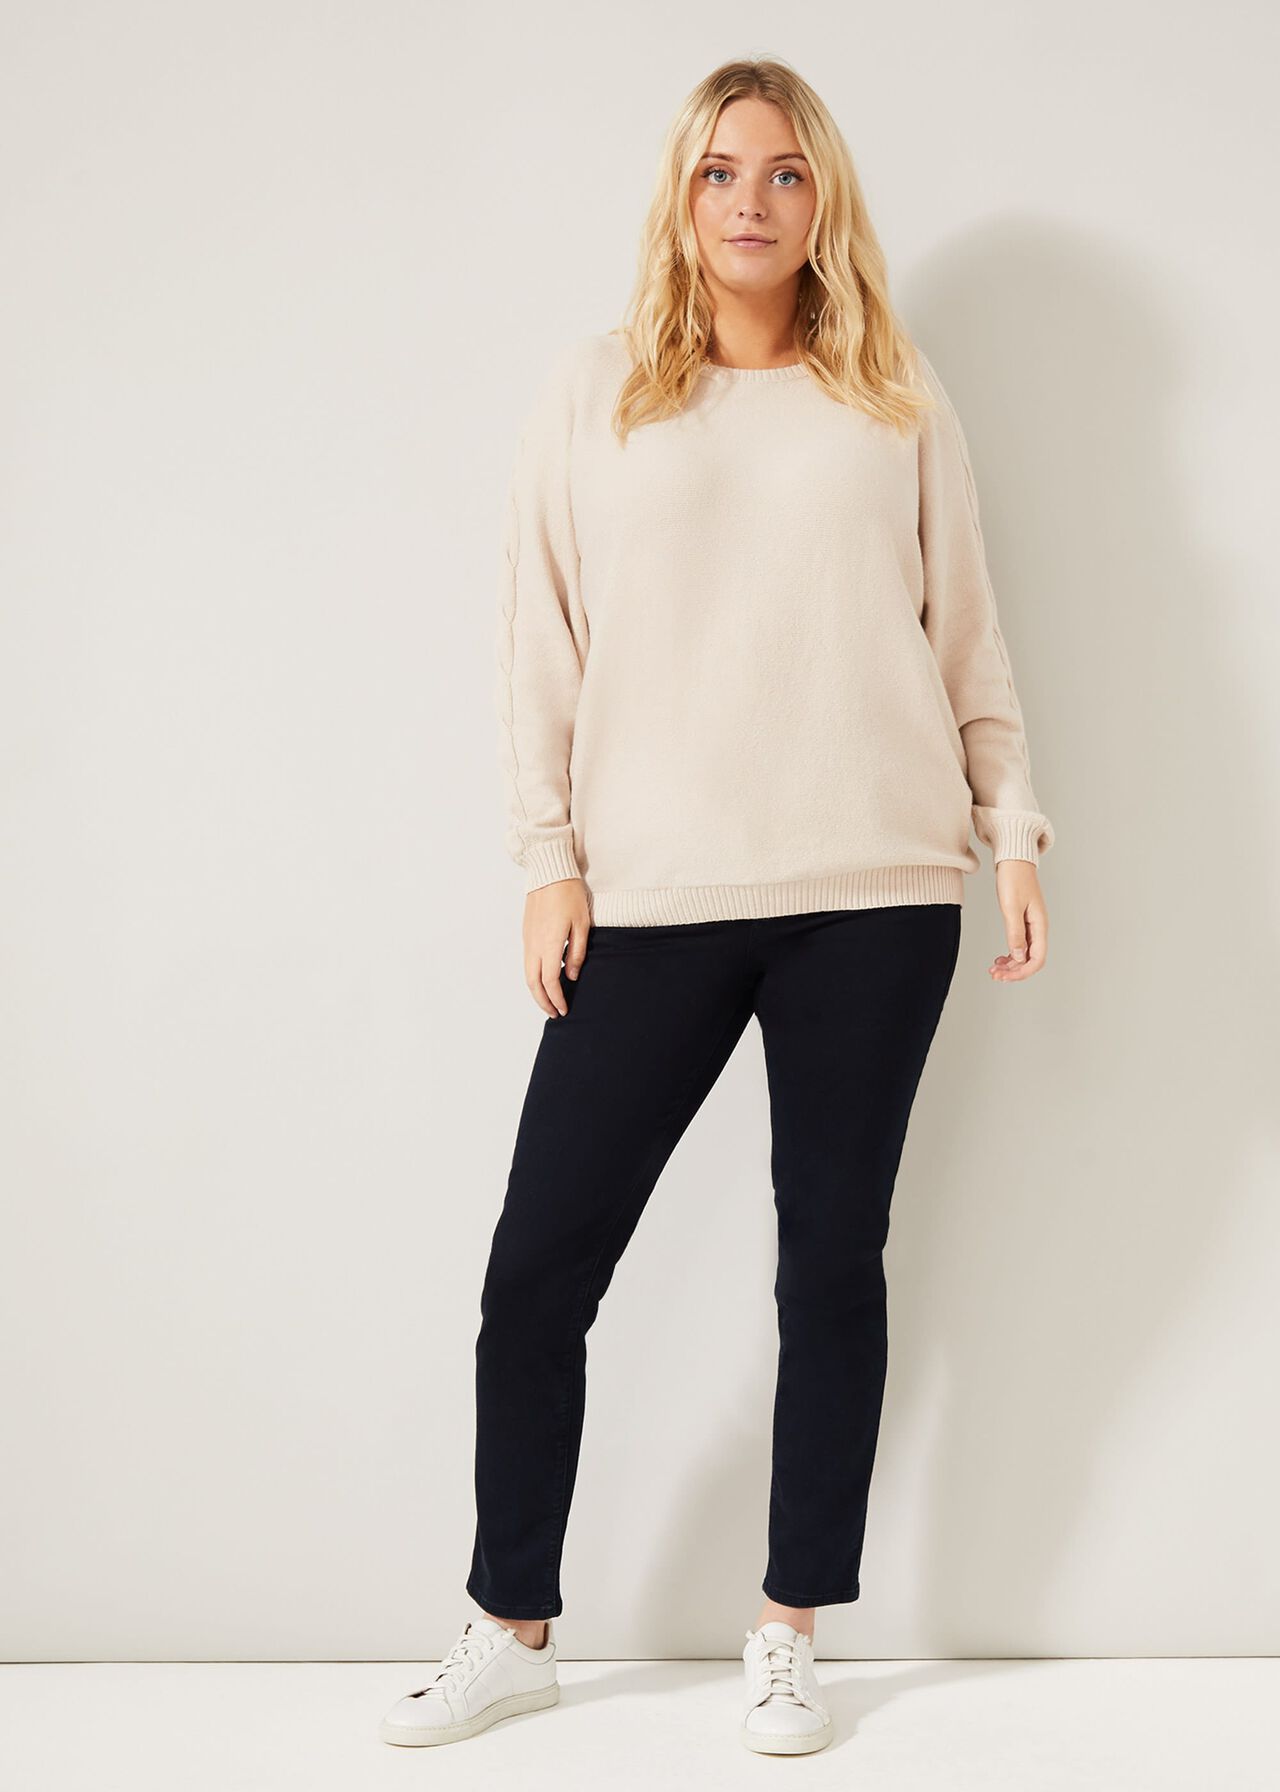 Stephie Cable Knit Jumper